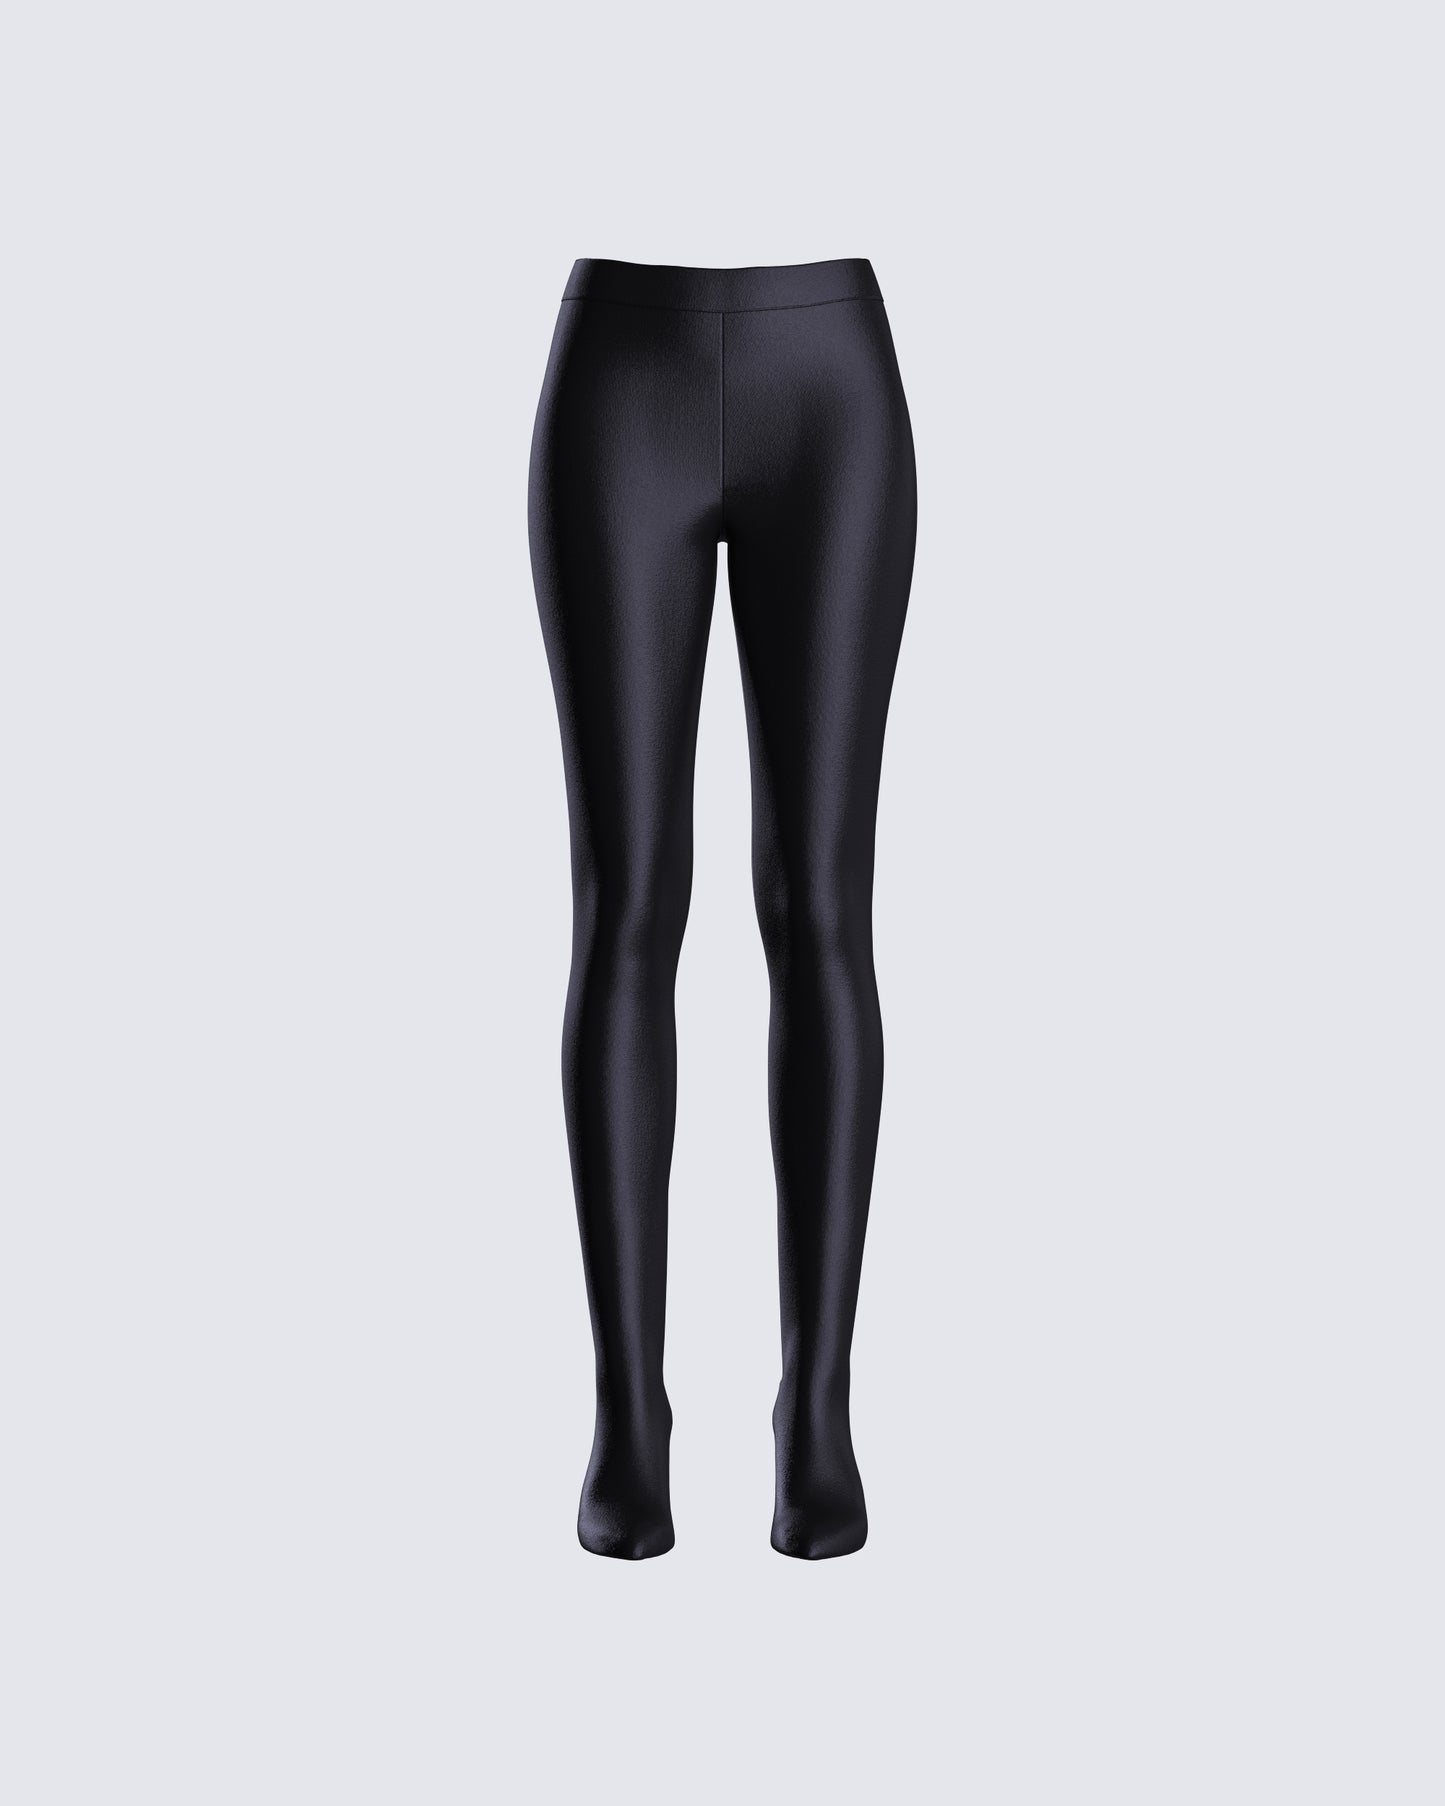 High Waisted Leggings With Heel Hole/ High Waist Black Leggings. Express  Shipping With DHL -  Israel